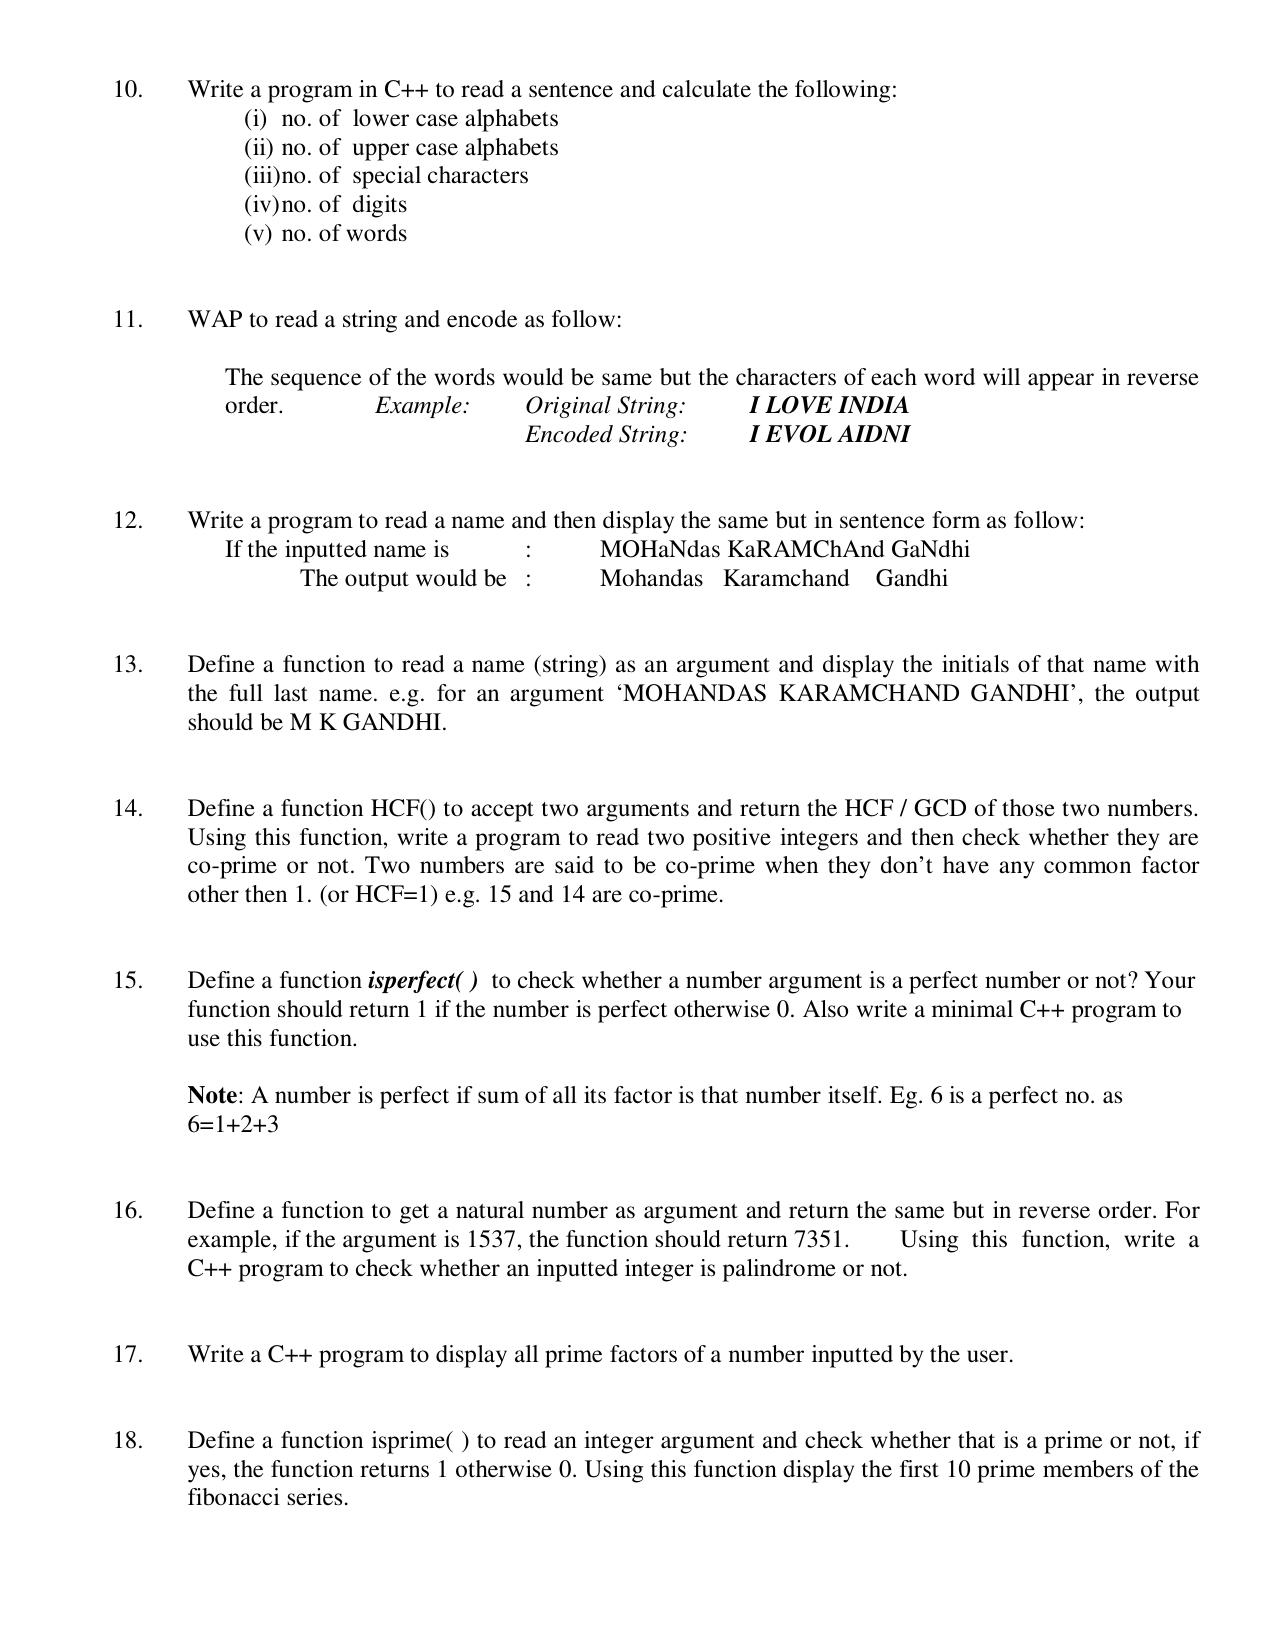 CBSE Worksheets for Class 11 Computer Science List of C++ Programs Assignment - Page 2